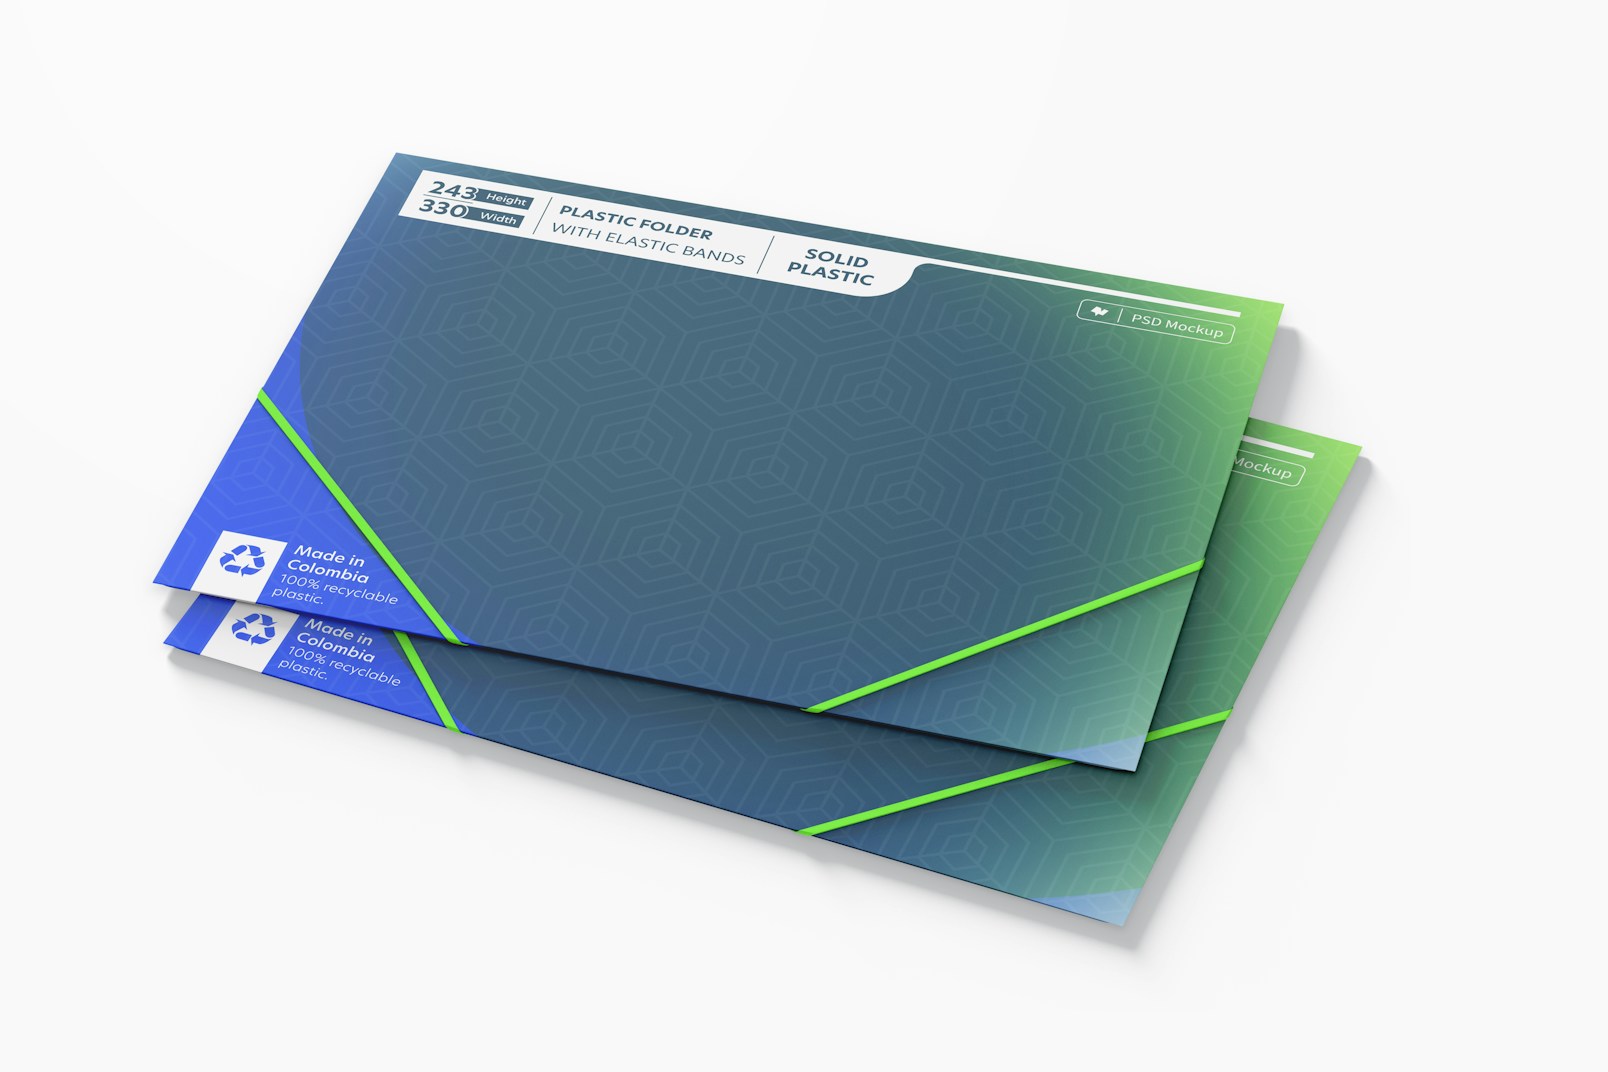 Plastic Folders with Elastic Bands Mockup, Perspective